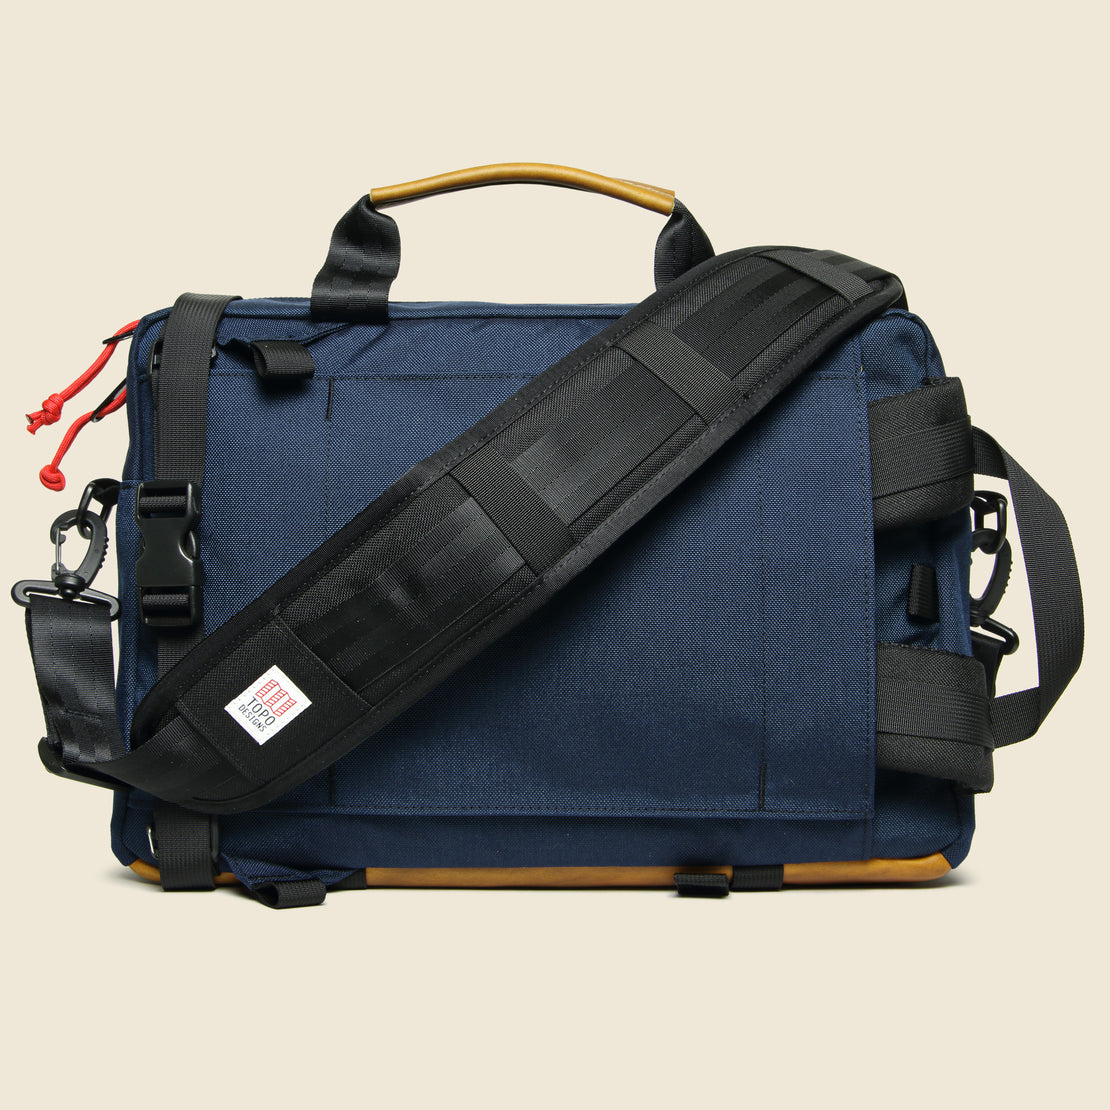 Commuter Briefcase - Navy/Brown Leather - Topo Designs - STAG Provisions - Accessories - Bags / Luggage